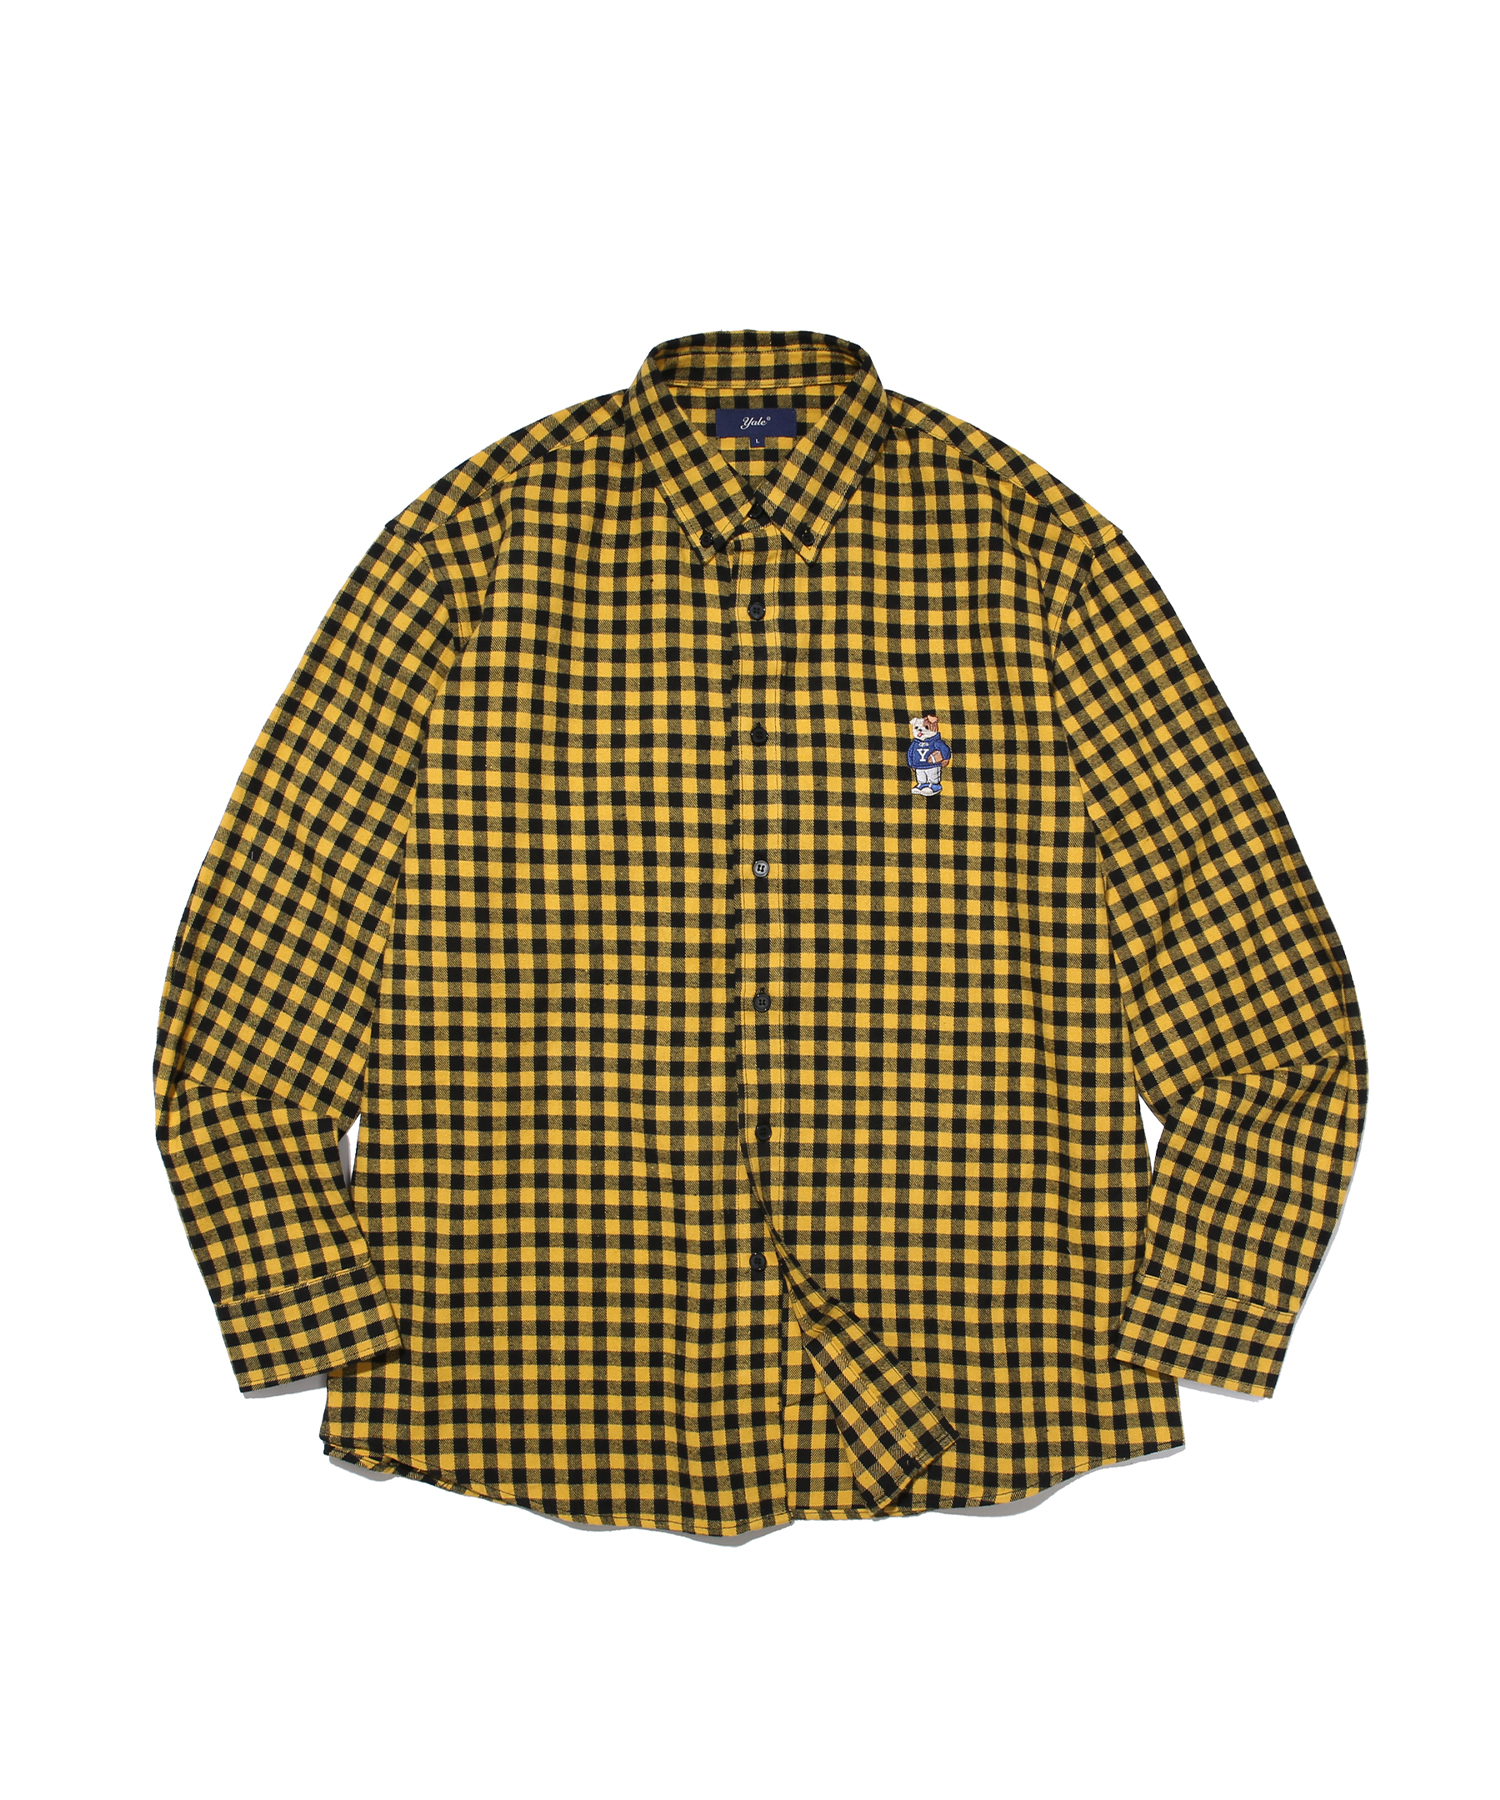 SMALL GINGHAM FLANNEL SHIRT YELLOW